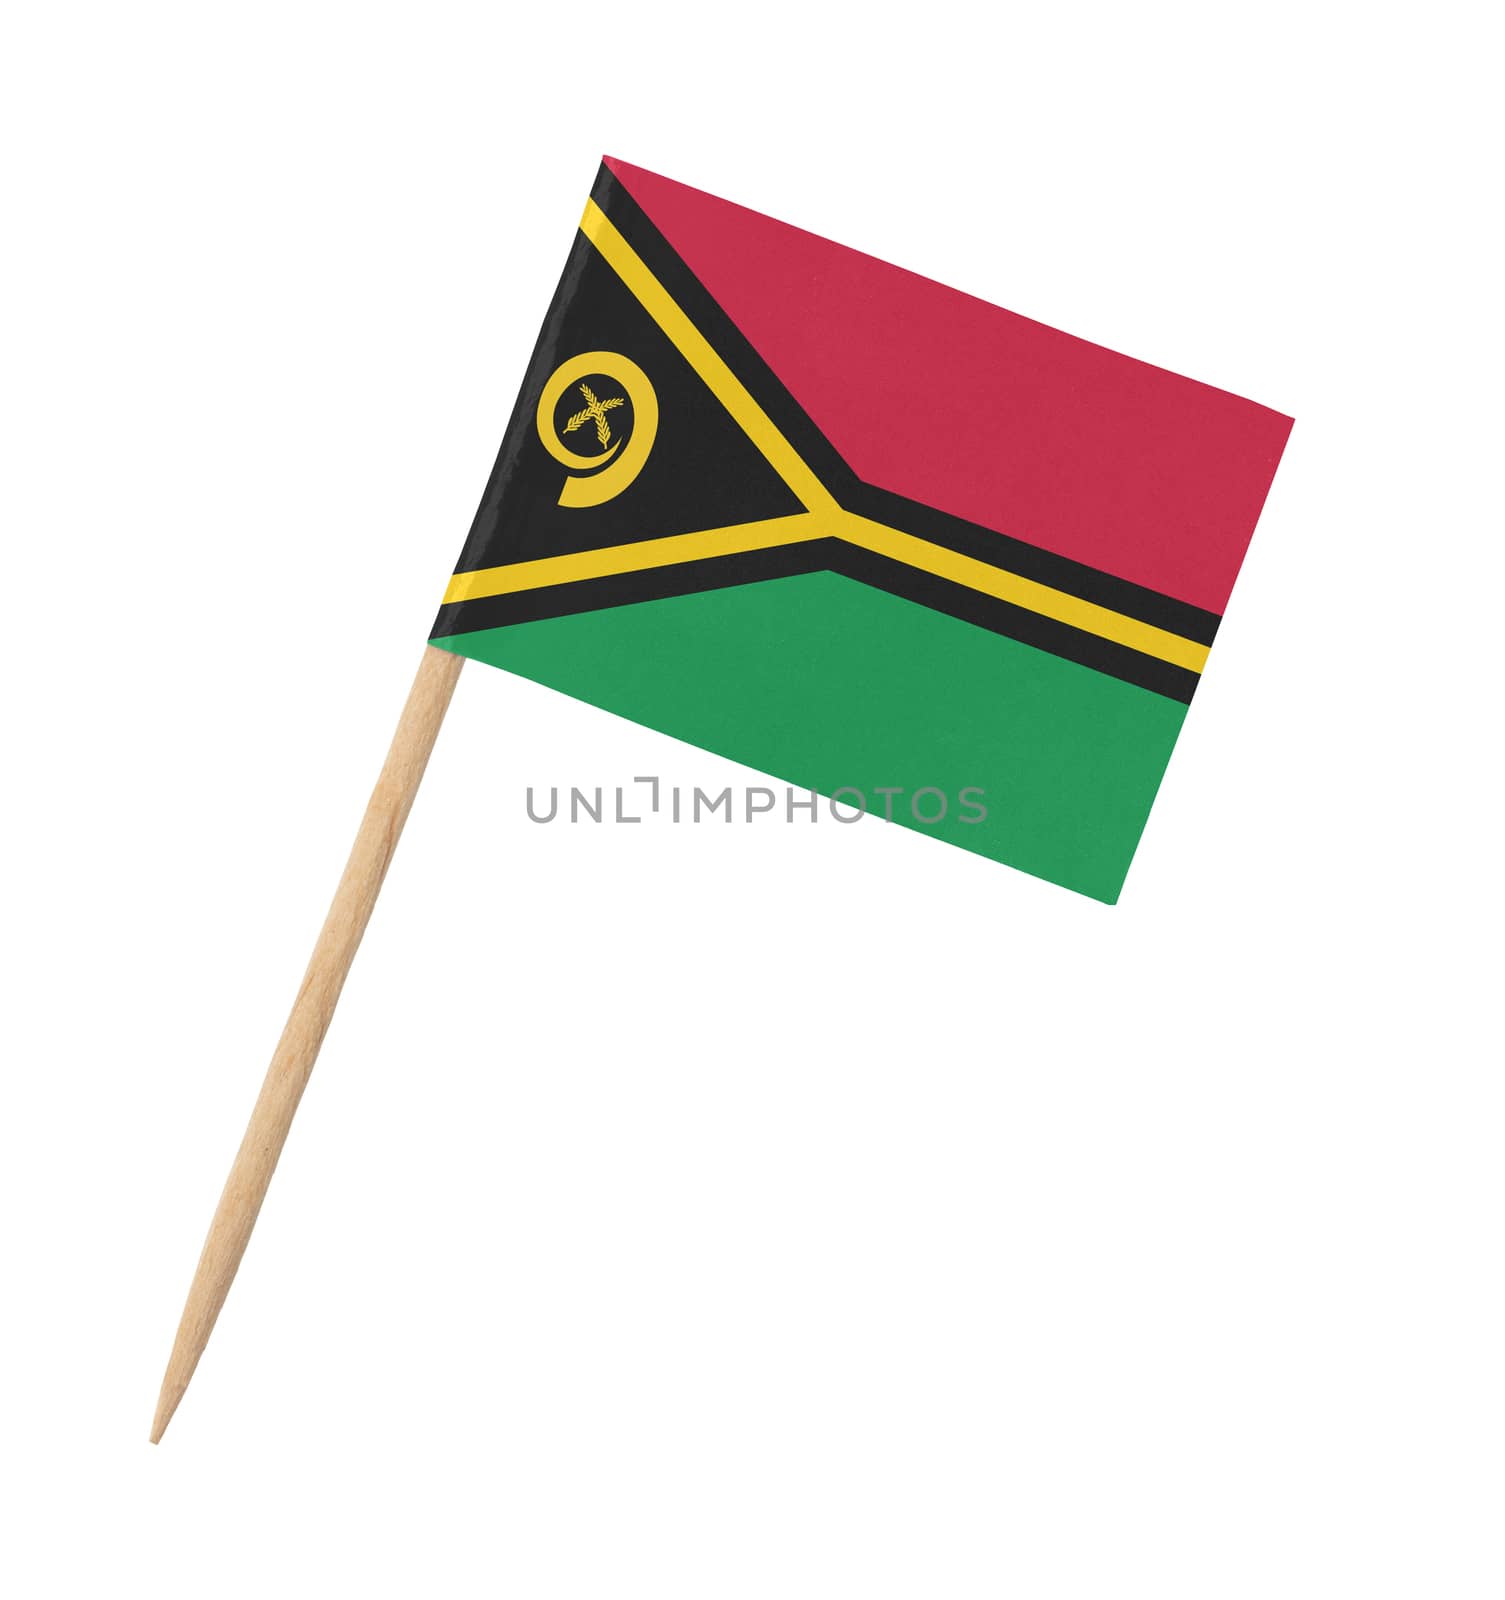 Small paper flag of Vanuatu on wooden stick, isolated on white